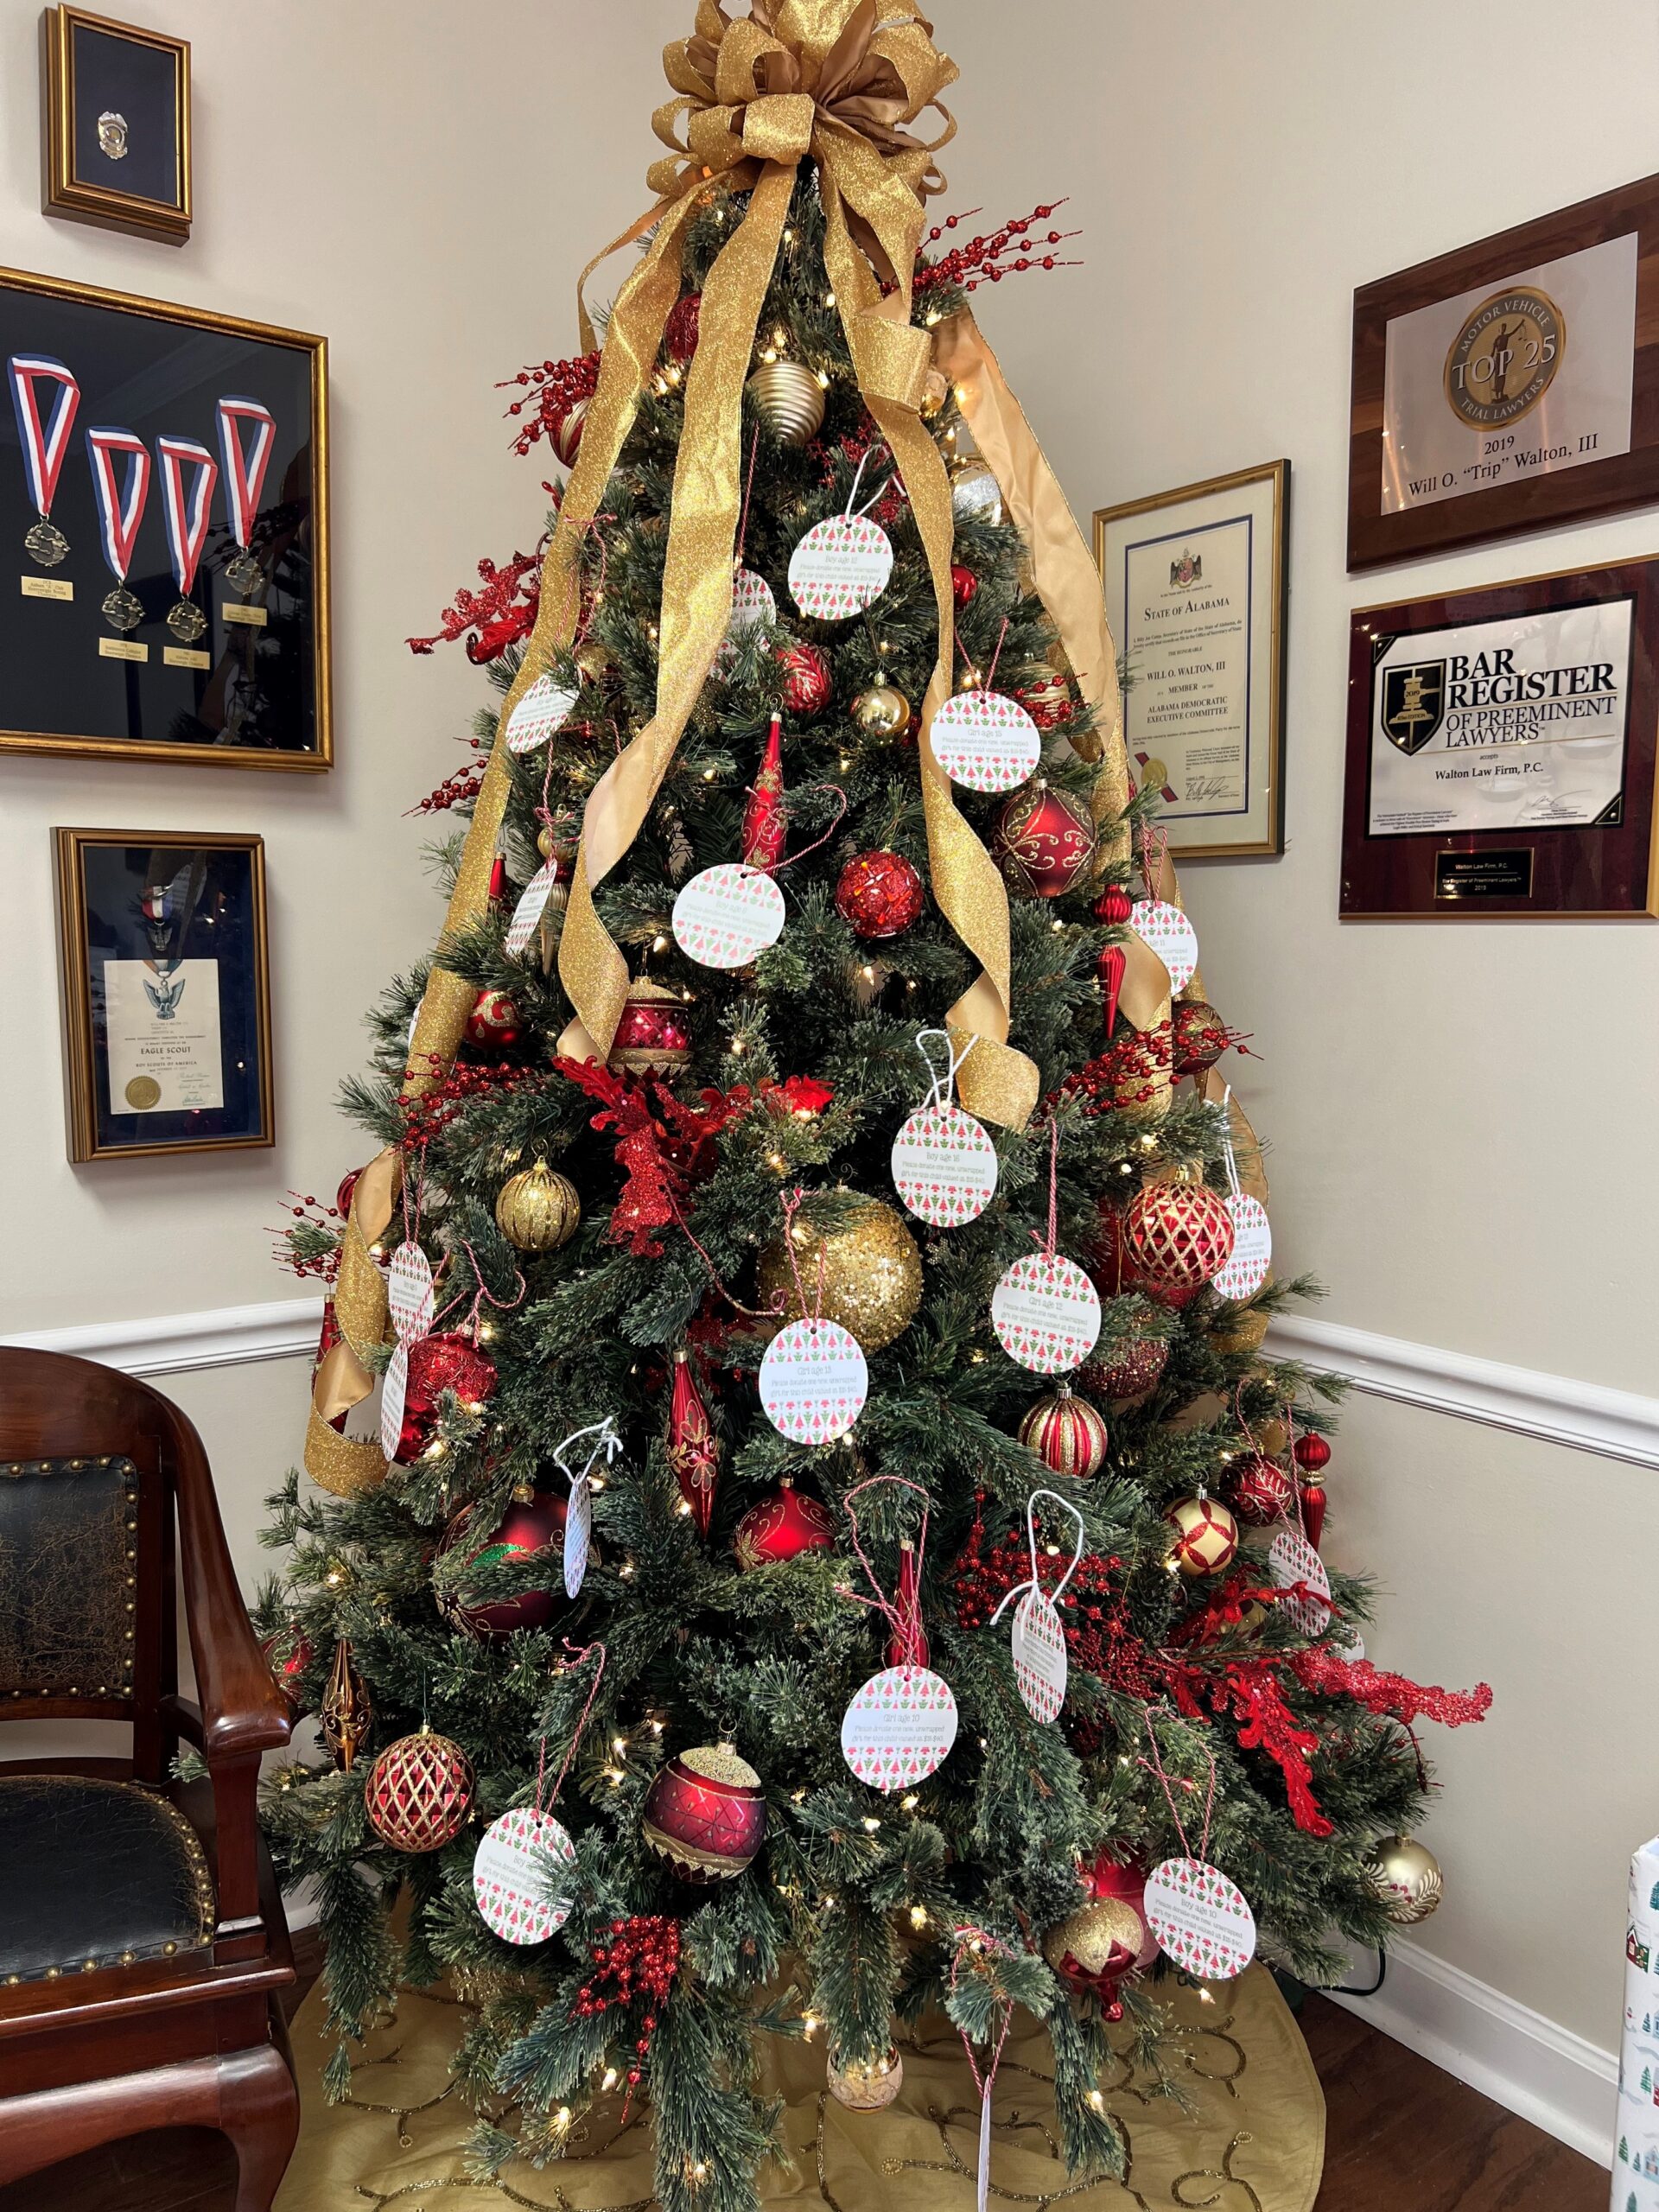 #AngelTree – Bring Joy to a local foster child with Walton Law Firm & Big House Foundation!